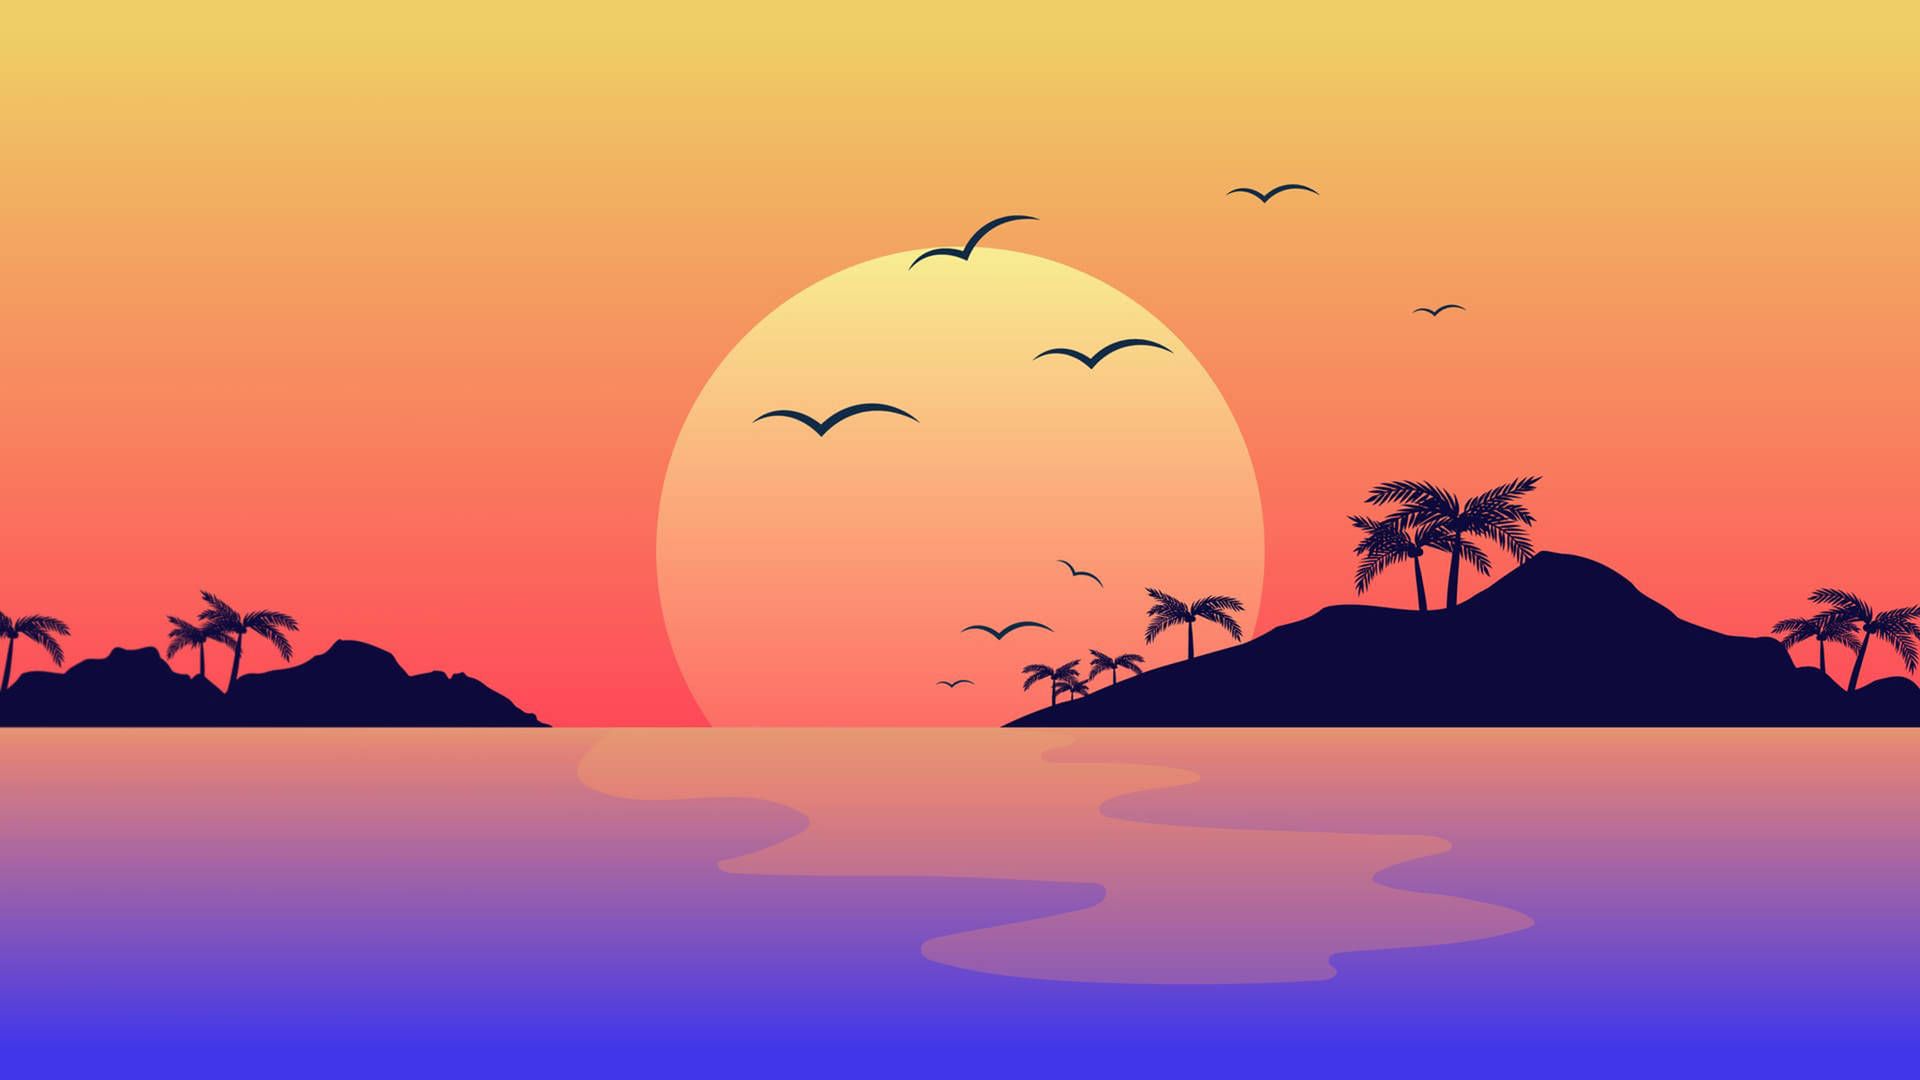 A beautiful sunset over a tropical island with palm trees. - 1920x1080, desktop